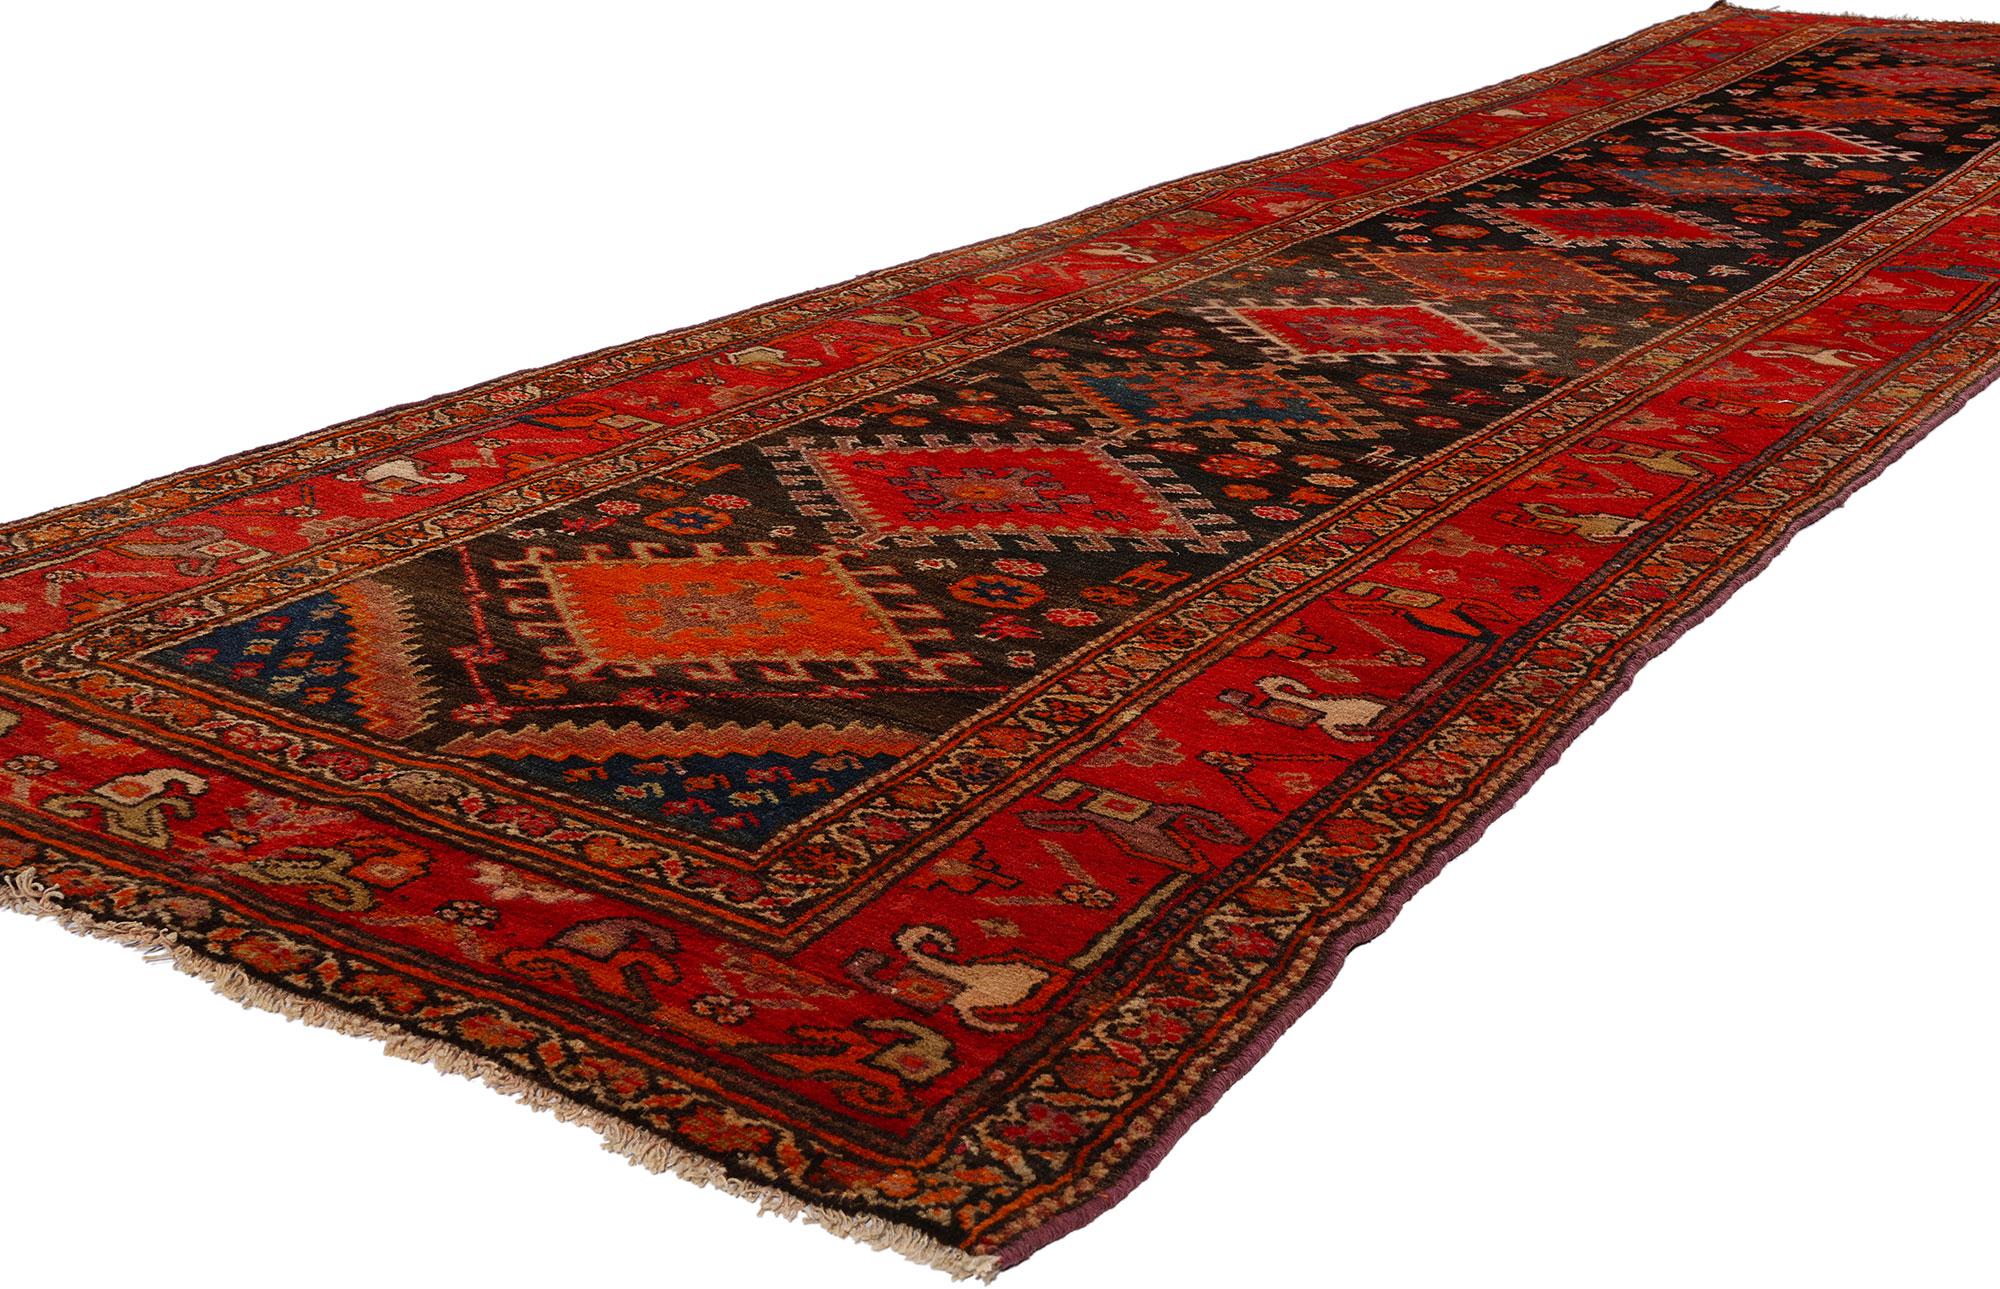 53875 Antique Persian Azerbaijan Rug Runner, 03'05 x 13'00. Persian Azerbaijan rugs are traditional handwoven carpets originating from the Azerbaijani region in northwestern Iran. Renowned for their intricate designs, vibrant colors, and geometric